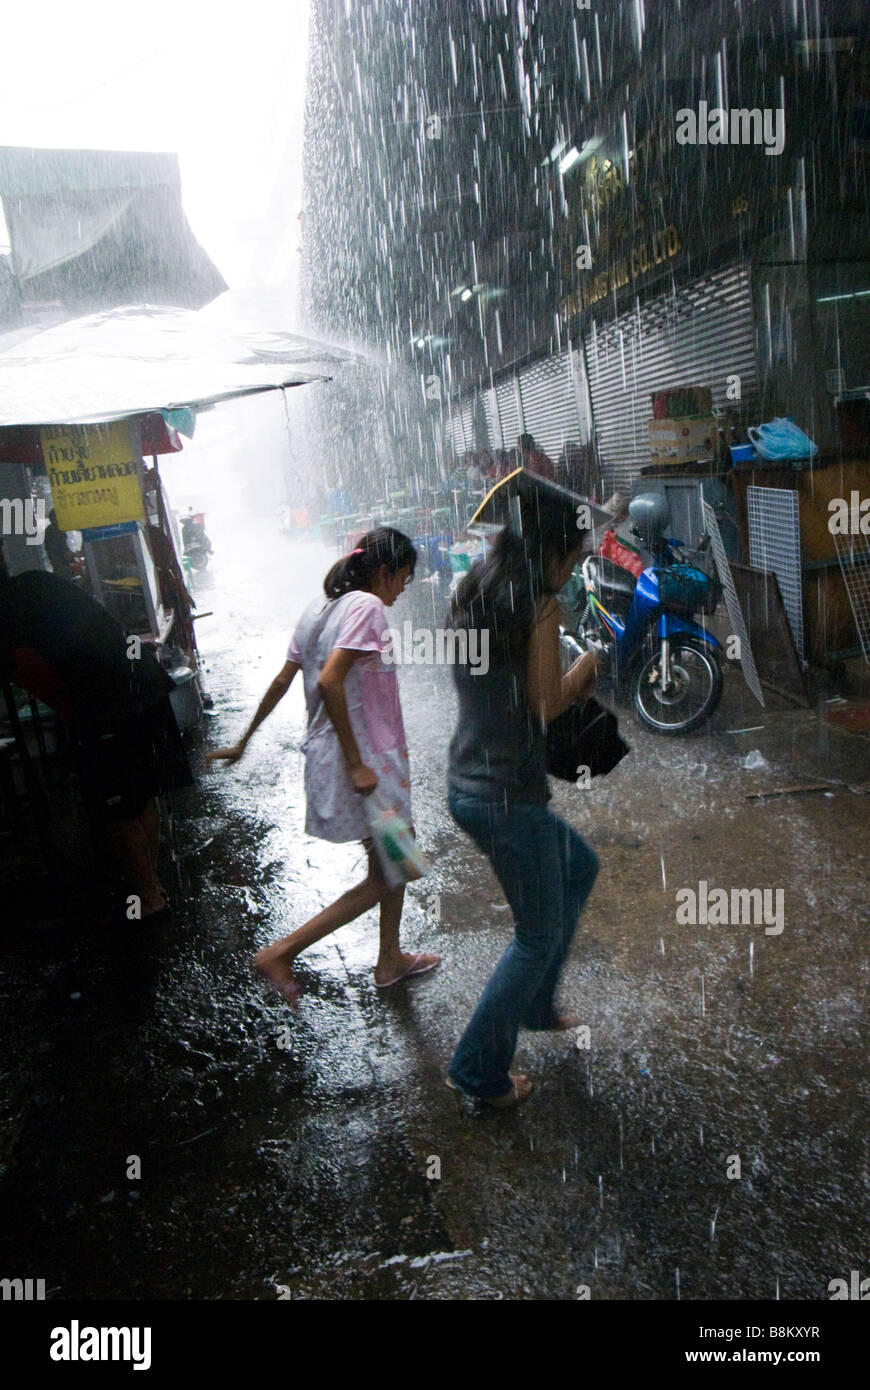 People caught in monsoon downpour in alleyway Chinatown central Bangkok Thailand Stock Photo